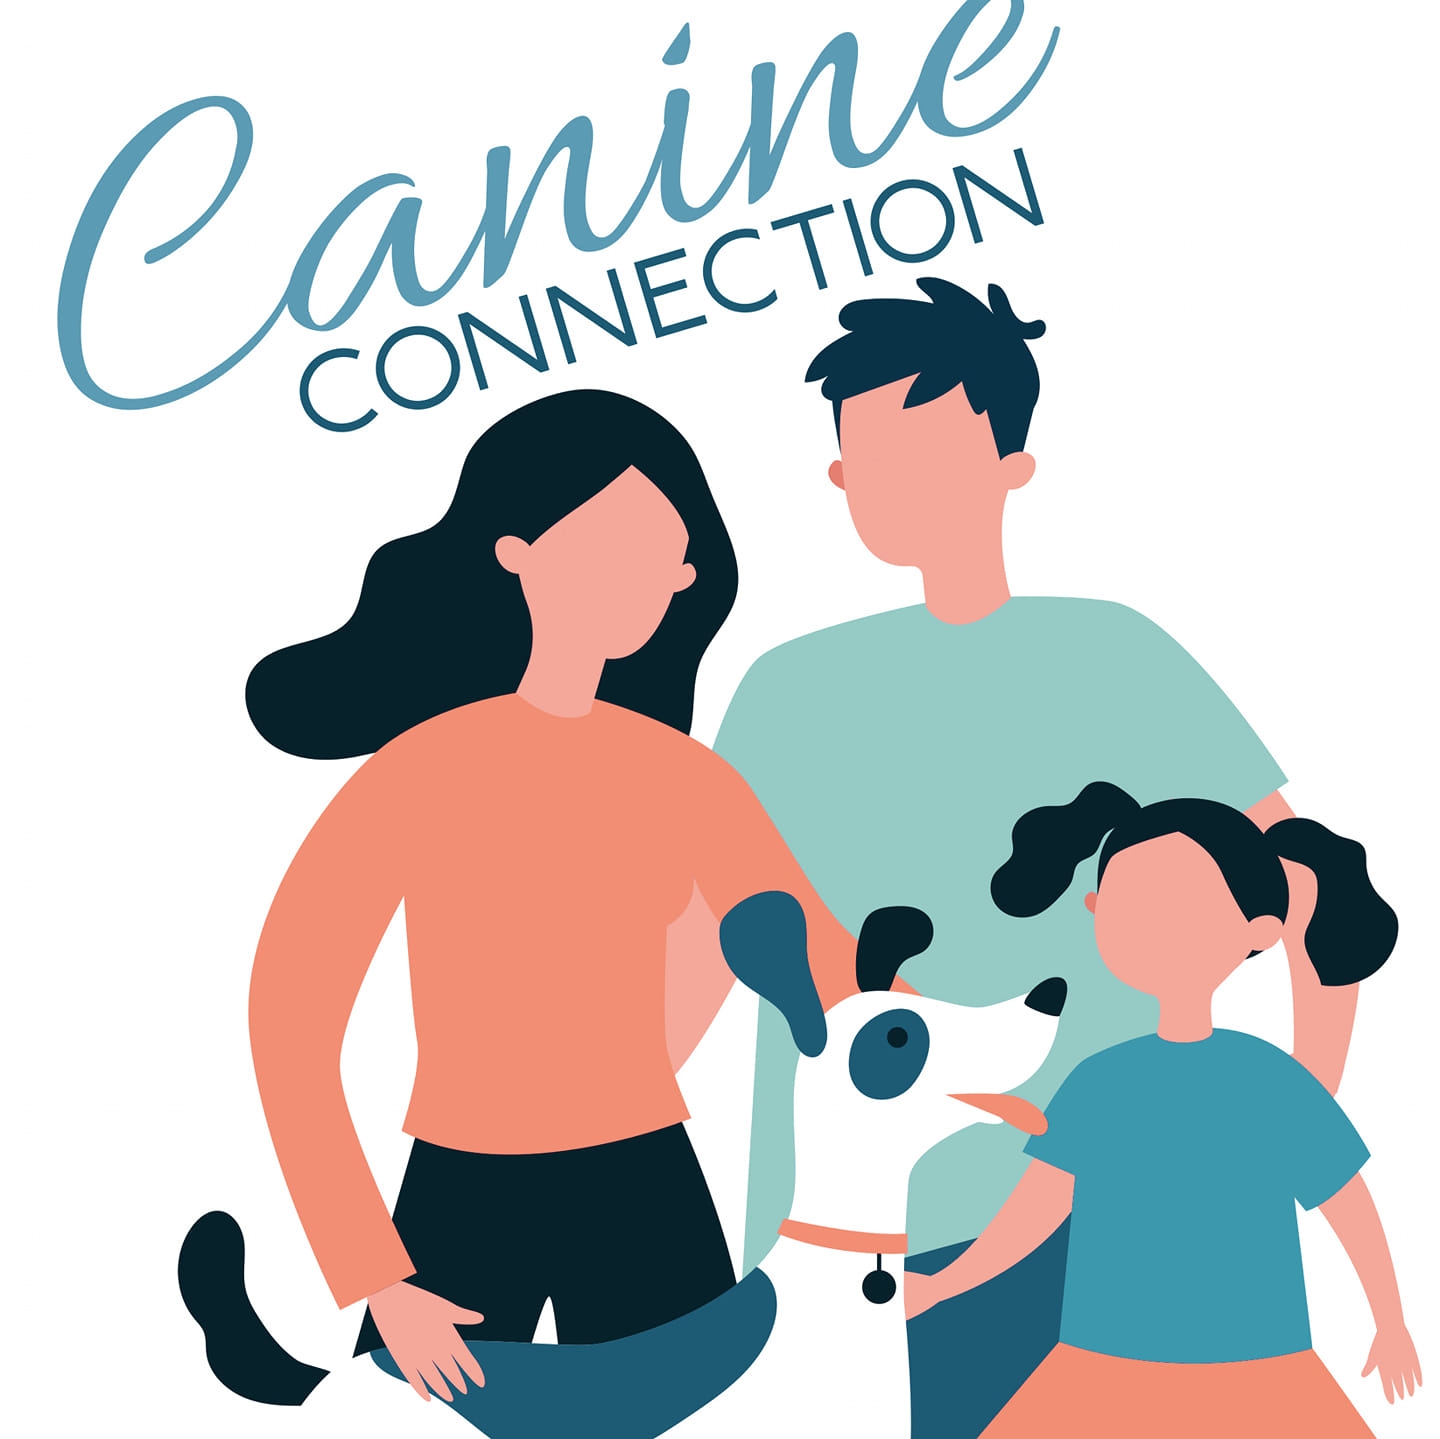 Company logo of Canine Connection